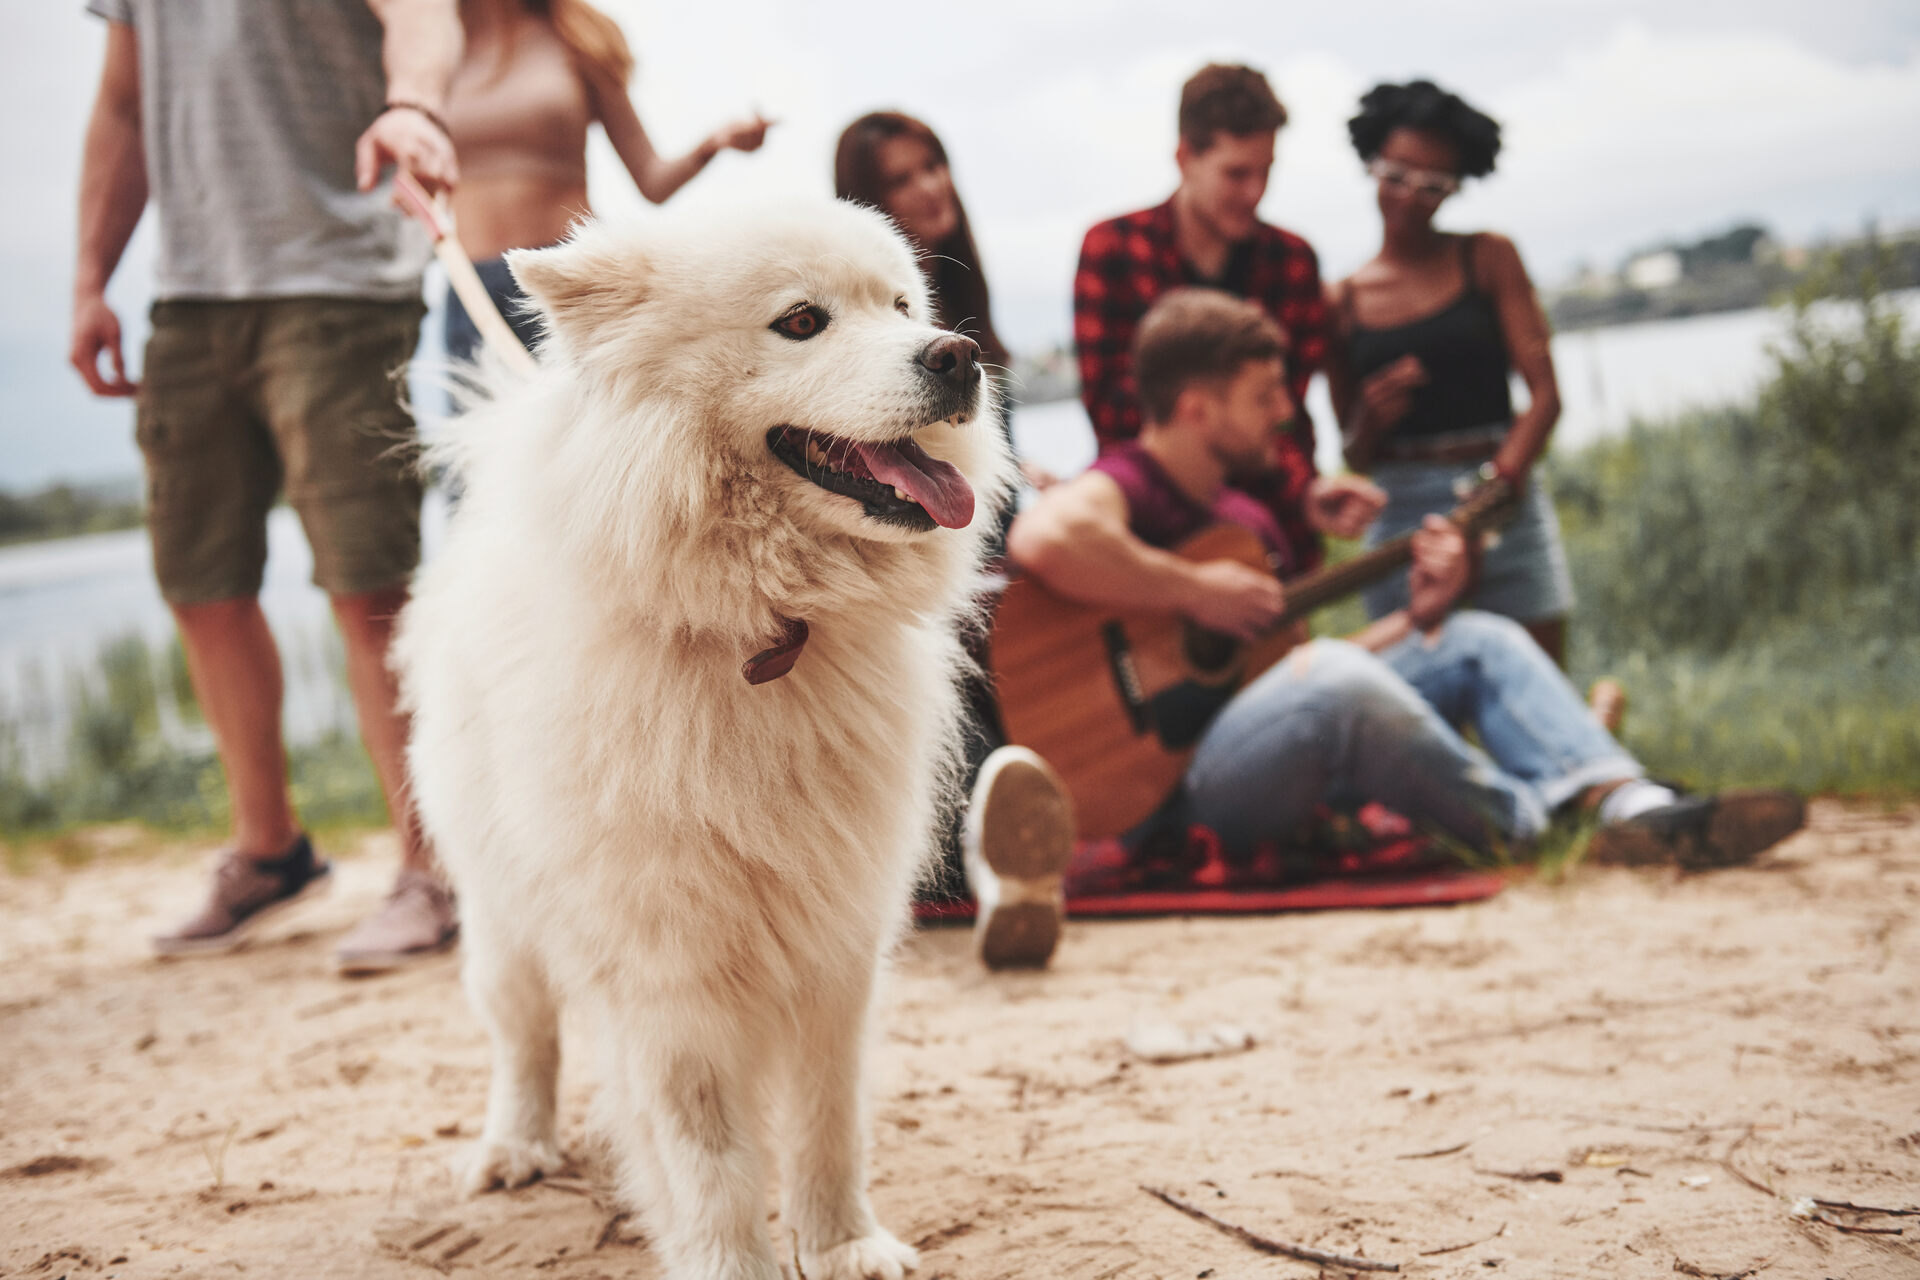 A white dog spending time with a group of friends outdoors